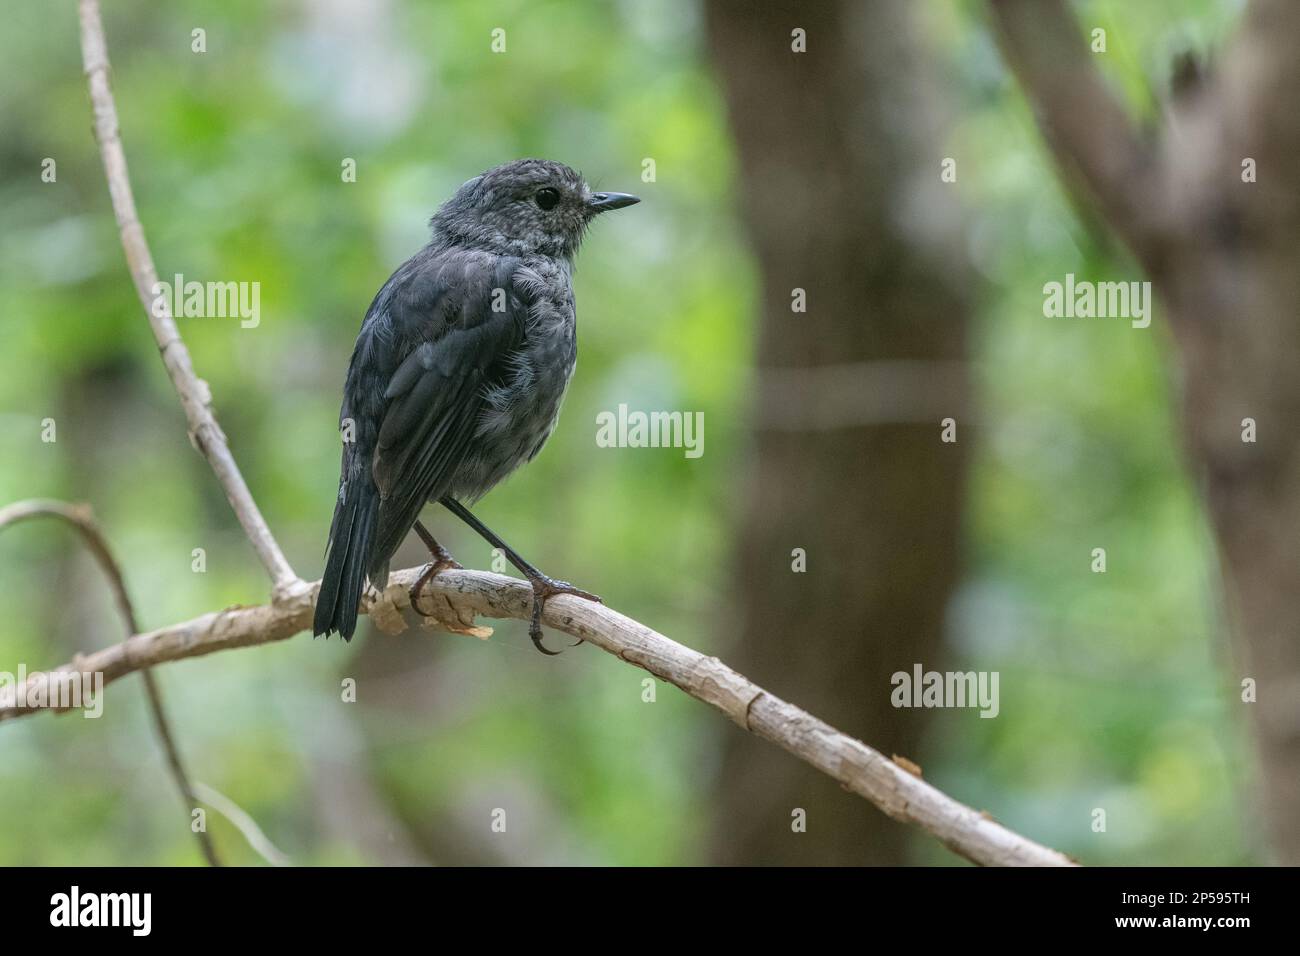 North Island robin (Petroica longipes) an endemic passerine bird found in the forest of Aotearoa New Zealand. Stock Photo